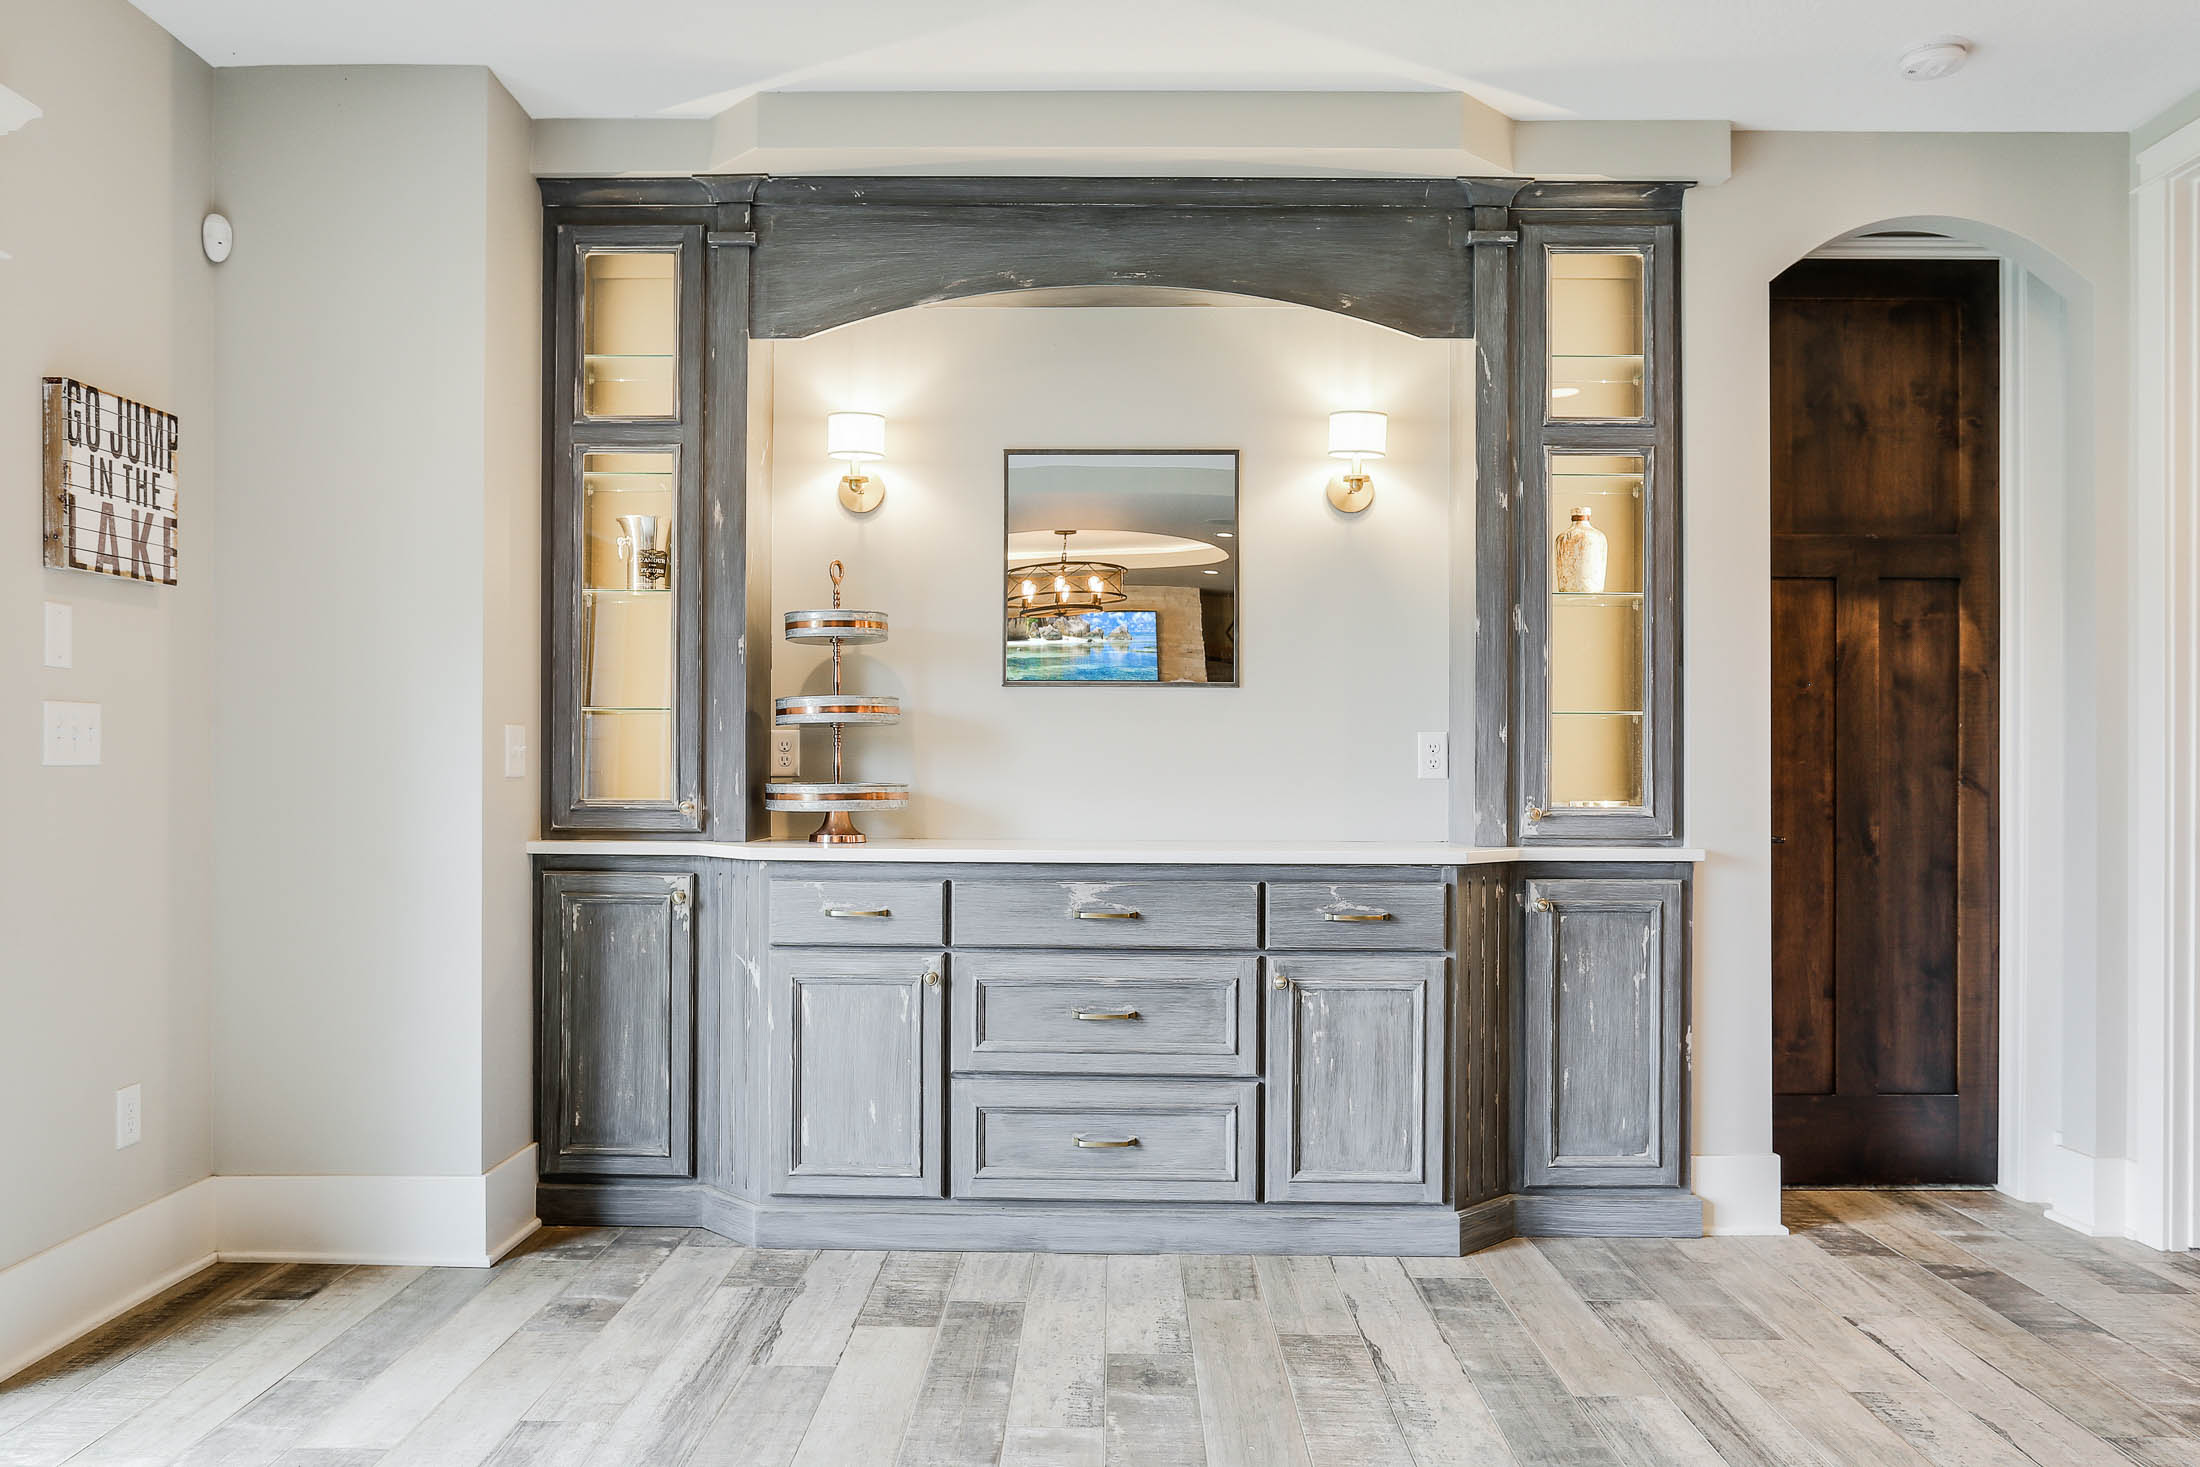 Built-in buffet with distressed enameled cabinets